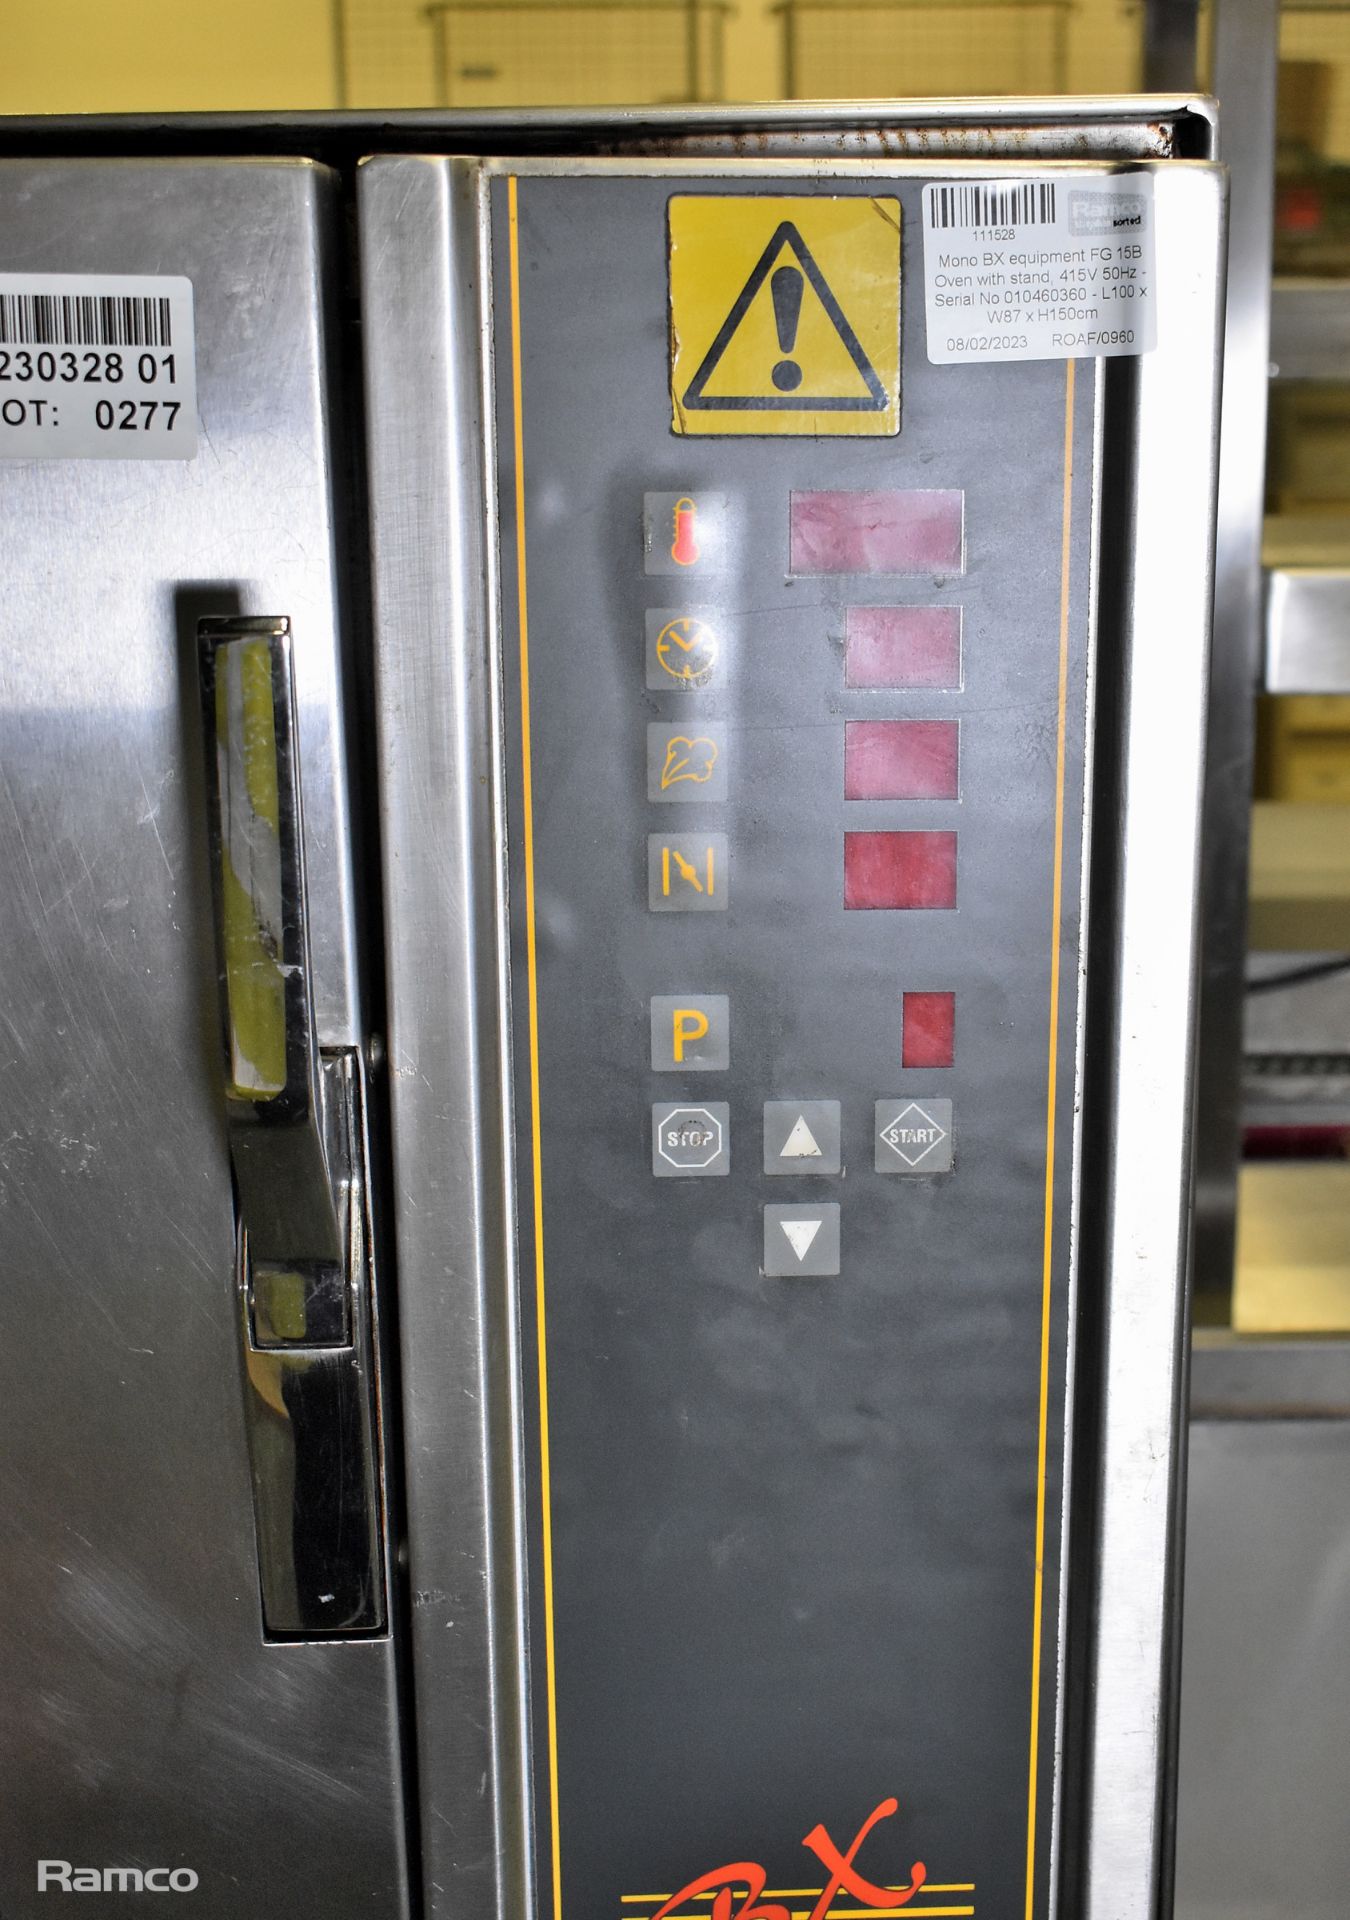 Mono BX equipment FG 15B Oven with stand, 415V 50Hz - Serial No 010460360 - L100 x W87 x H150cm - Image 5 of 7